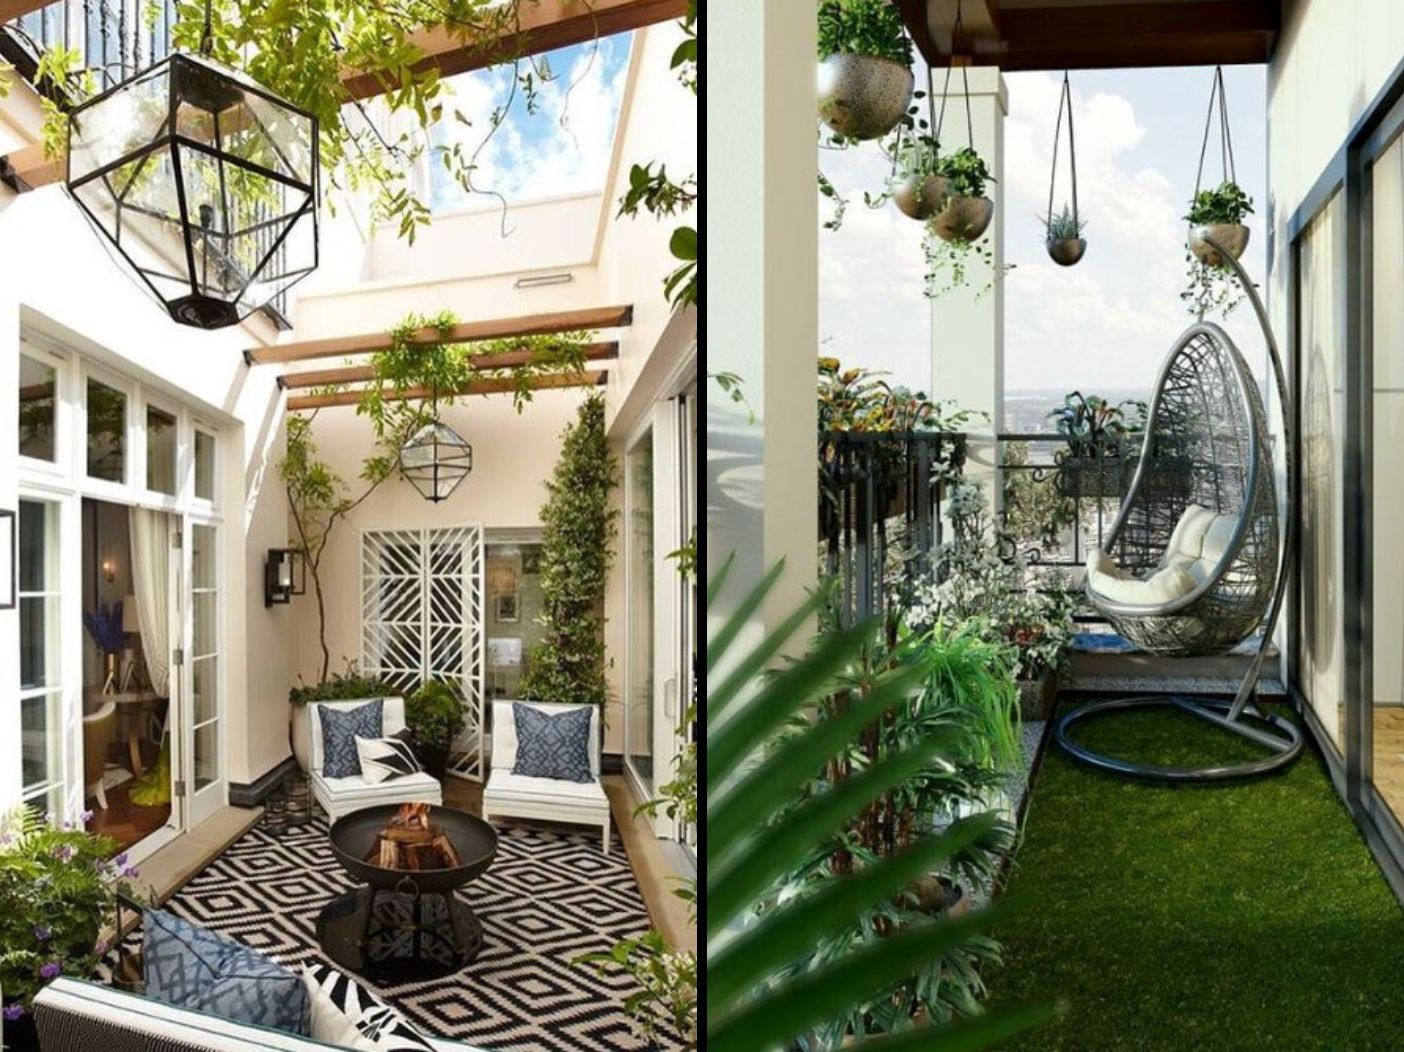 Are You Short on Space? These Cozy Backyards Remind You That Size Doesn’t Matter